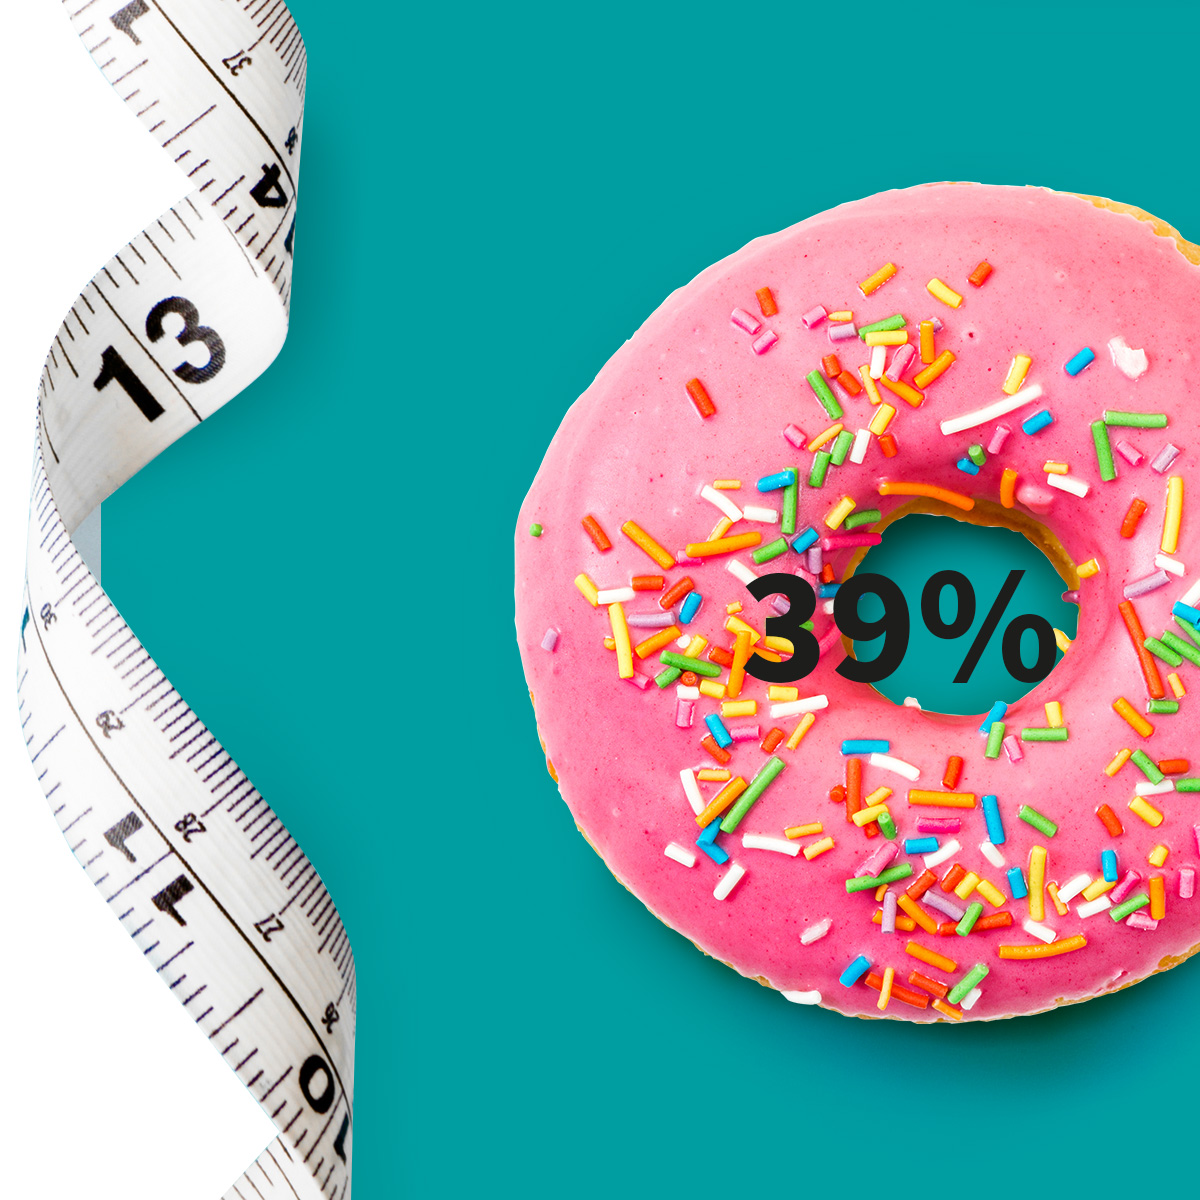 [.CH-de Switzerland (german)] [.DE-de Germany (german)] •	A measuring tape and a doughnut with pink icing and colourful sugar sprinkle as a metaphor for obesity